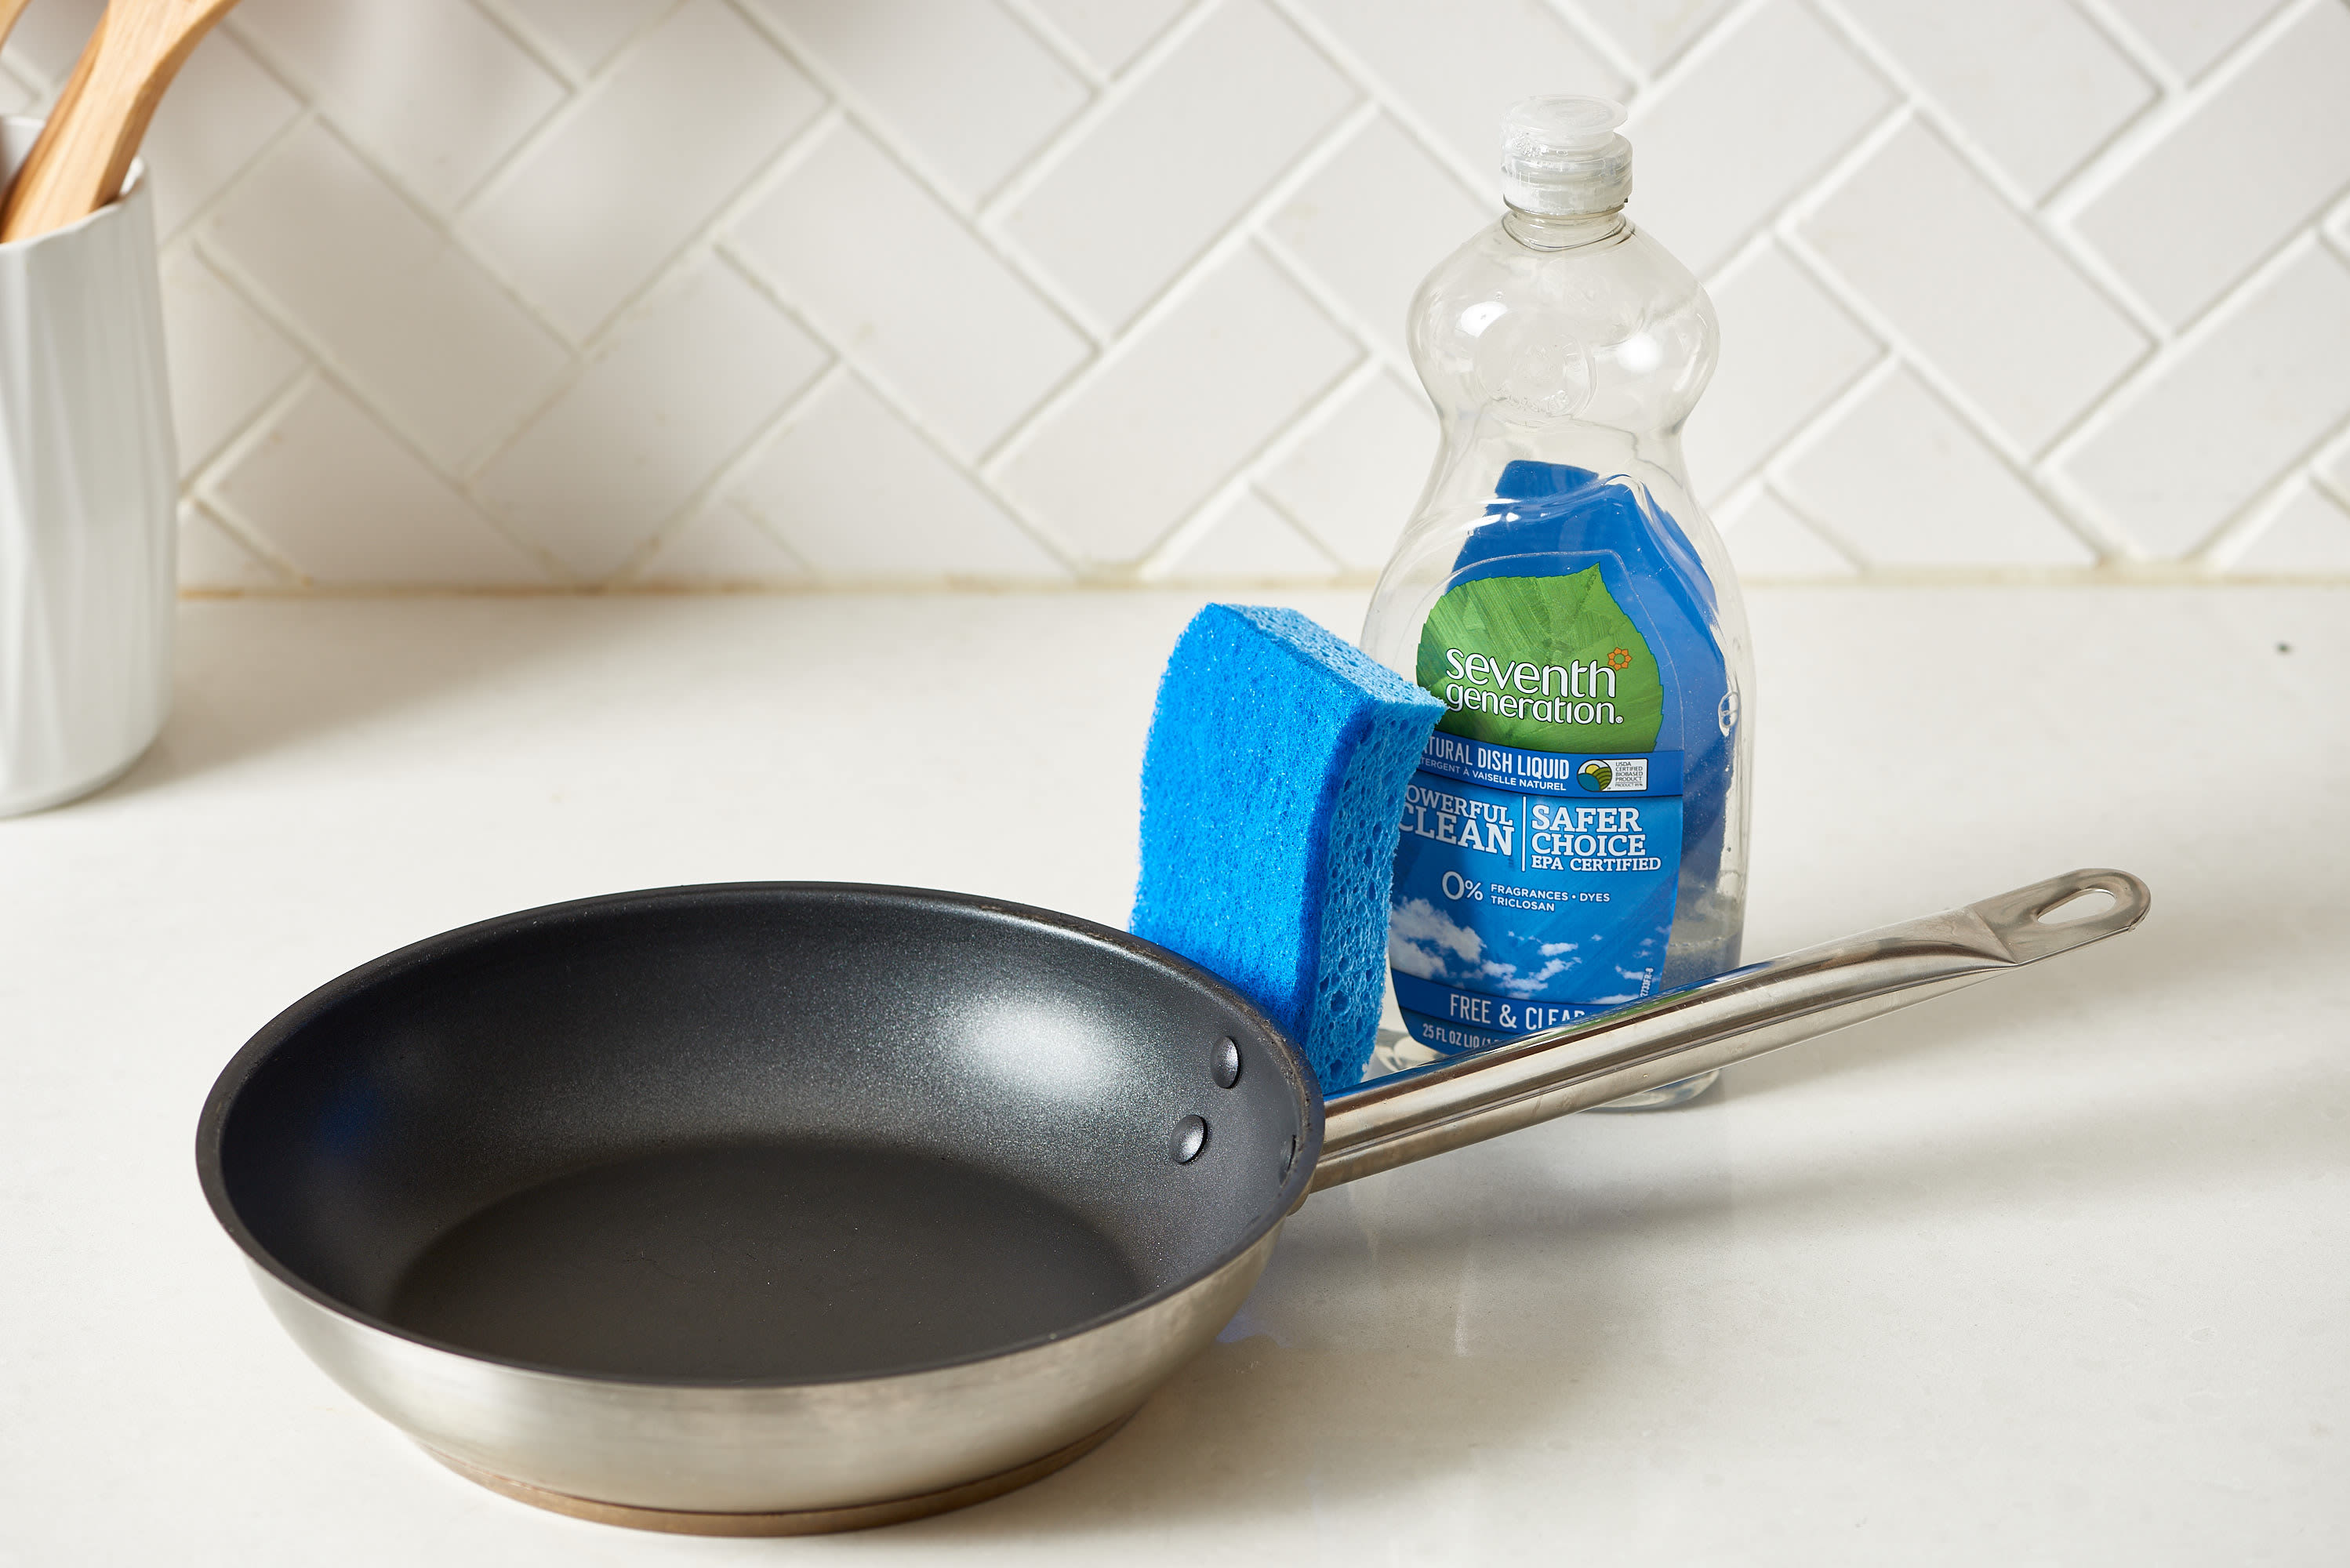 Make kitchen cleanup a breeze w/ this Calphalon Nonstick 12-inch